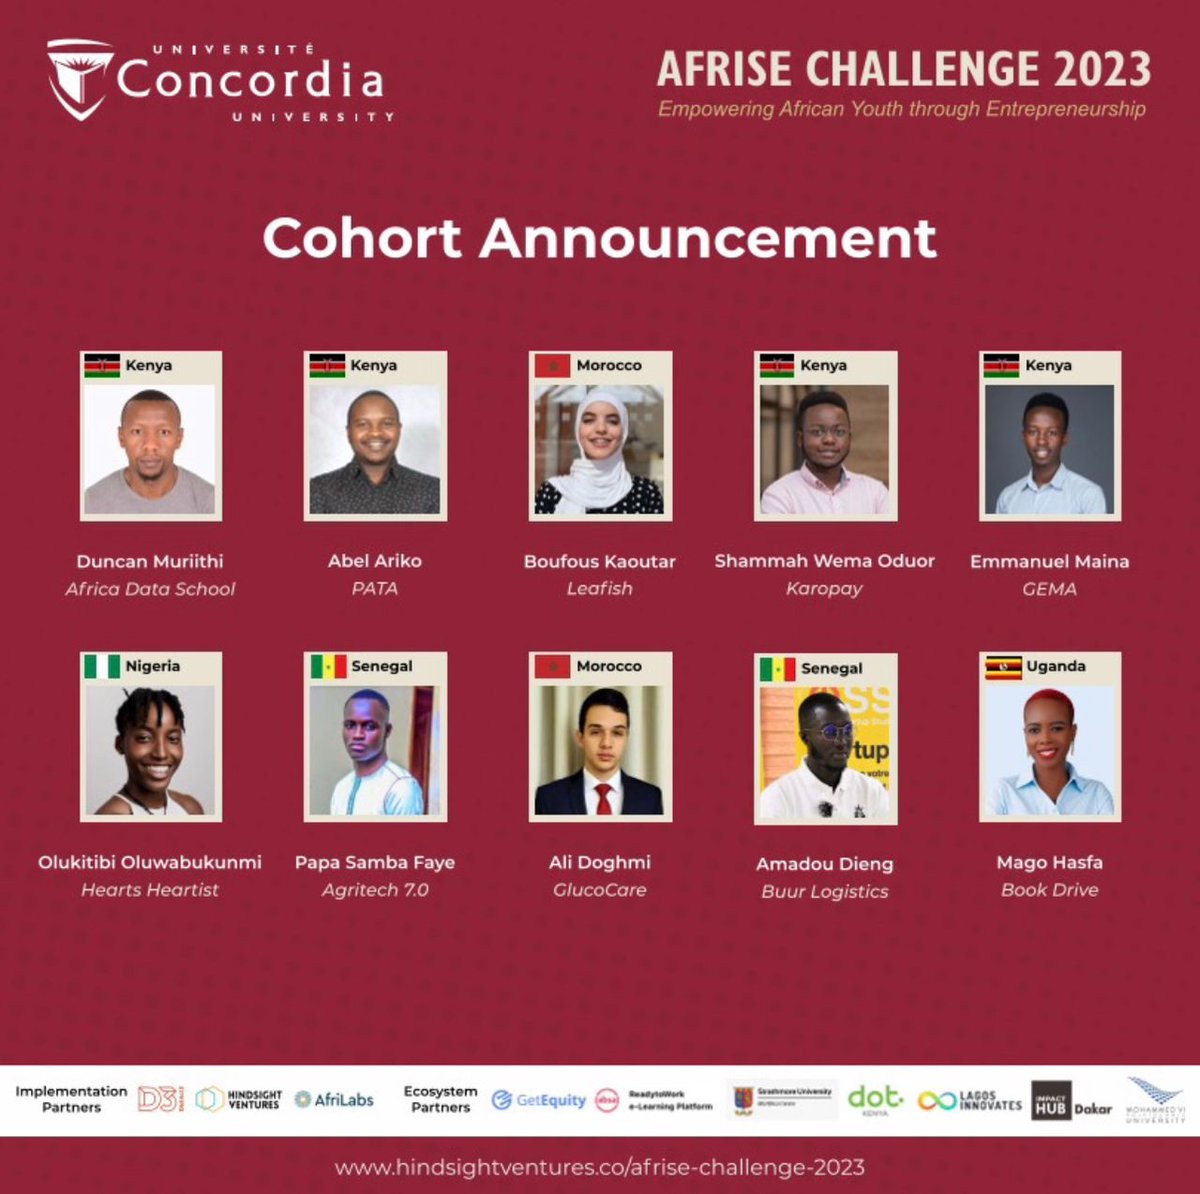 Concordia University has launched the 2023 #AFRISE Challenge and we are privy to be amongst the selected candidates for this opportunity.
•
•
•
#AfriseChallenge #AfricanYouthEntrepreneurs #StudentEntrepreneurs #FundsForNGOs #EducationFunding #EmpoweringAfricanYouth